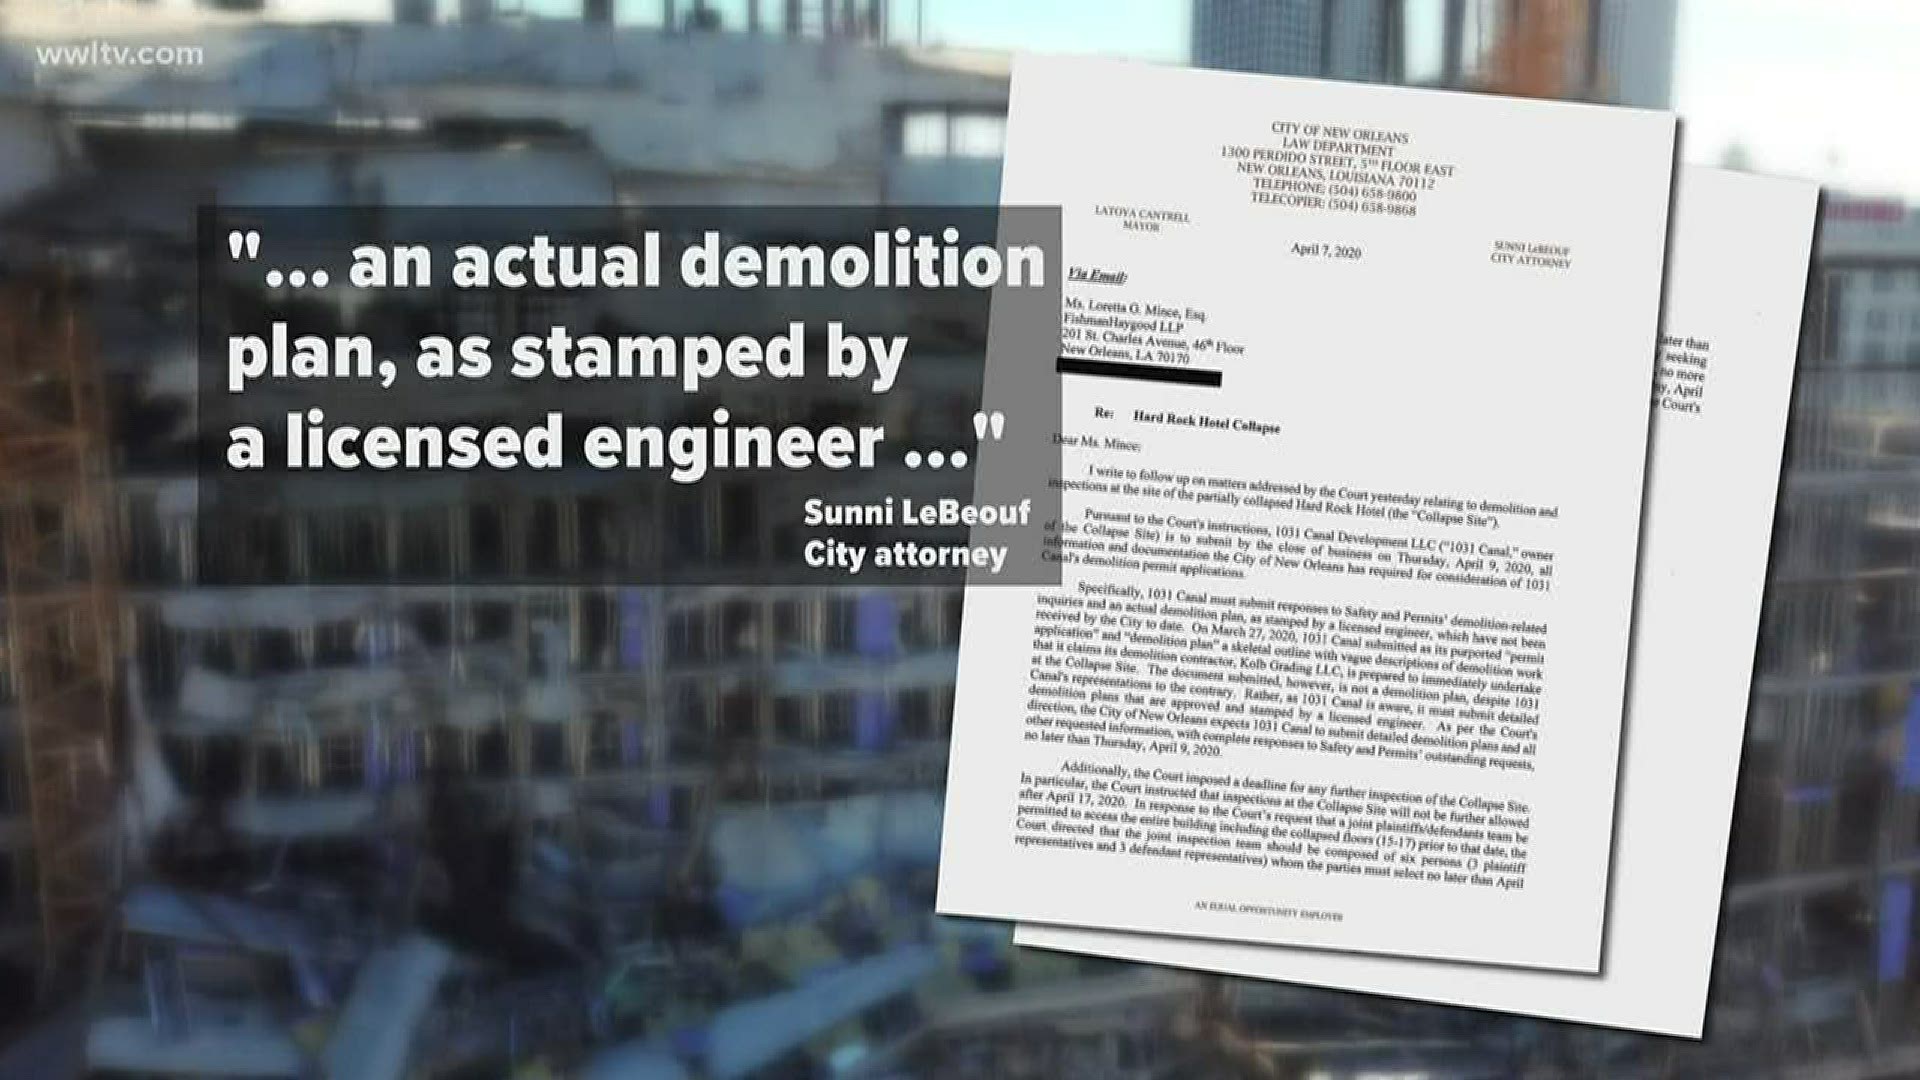 In a letter obtained by Eyewitness News, city attorney Sunni LeBeouf writes that 10-31 Canal Development must turn over "an actual demolition plan."